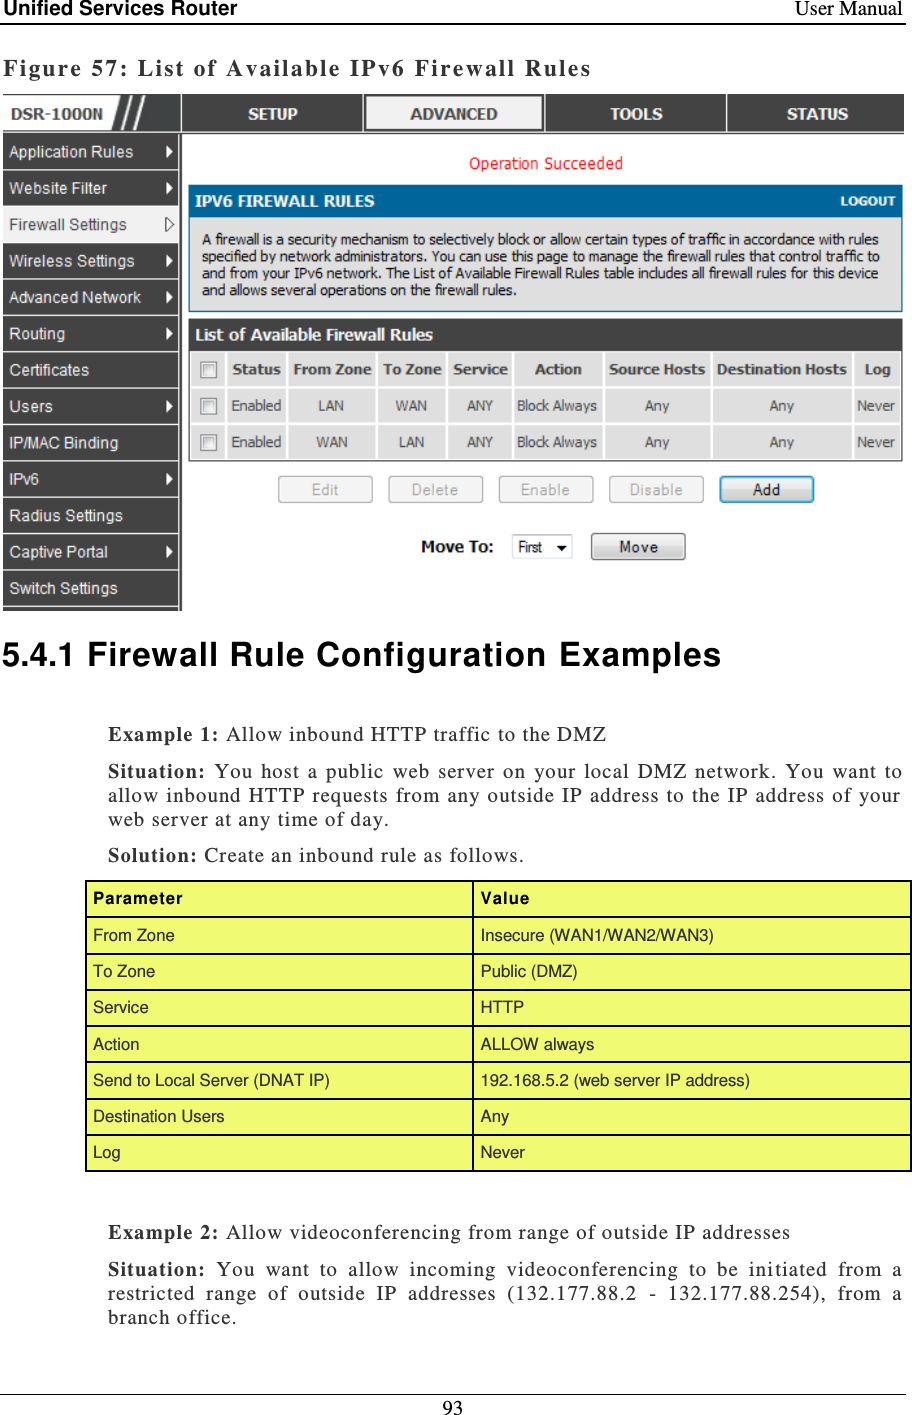 Unified Services Router    User Manual 93  Figure 57: List of Available IPv6  Firewall Rule s  5.4.1  Firewall Rule Configuration Examples  Example 1: Allow inbound HTTP traffic to the DMZ Situation:  You  host  a  public  web  server  on  your  local  DMZ  network.  You  want  to allow  inbound  HTTP requests from any  outside  IP address to the IP address of  your web server at any time of day.  Solution: Create an inbound rule as follows. Parameter Value From Zone Insecure (WAN1/WAN2/WAN3) To Zone Public (DMZ) Service HTTP Action ALLOW always Send to Local Server (DNAT IP) 192.168.5.2 (web server IP address) Destination Users Any Log Never  Example 2: Allow videoconferencing from range of outside IP addresses  Situation:  You  want  to  allow  incoming  videoconferencing  to  be  ini tiated  from  a restricted  range  of  outside  IP  addresses  (132.177.88.2  -  132.177.88.254),  from  a branch office. 